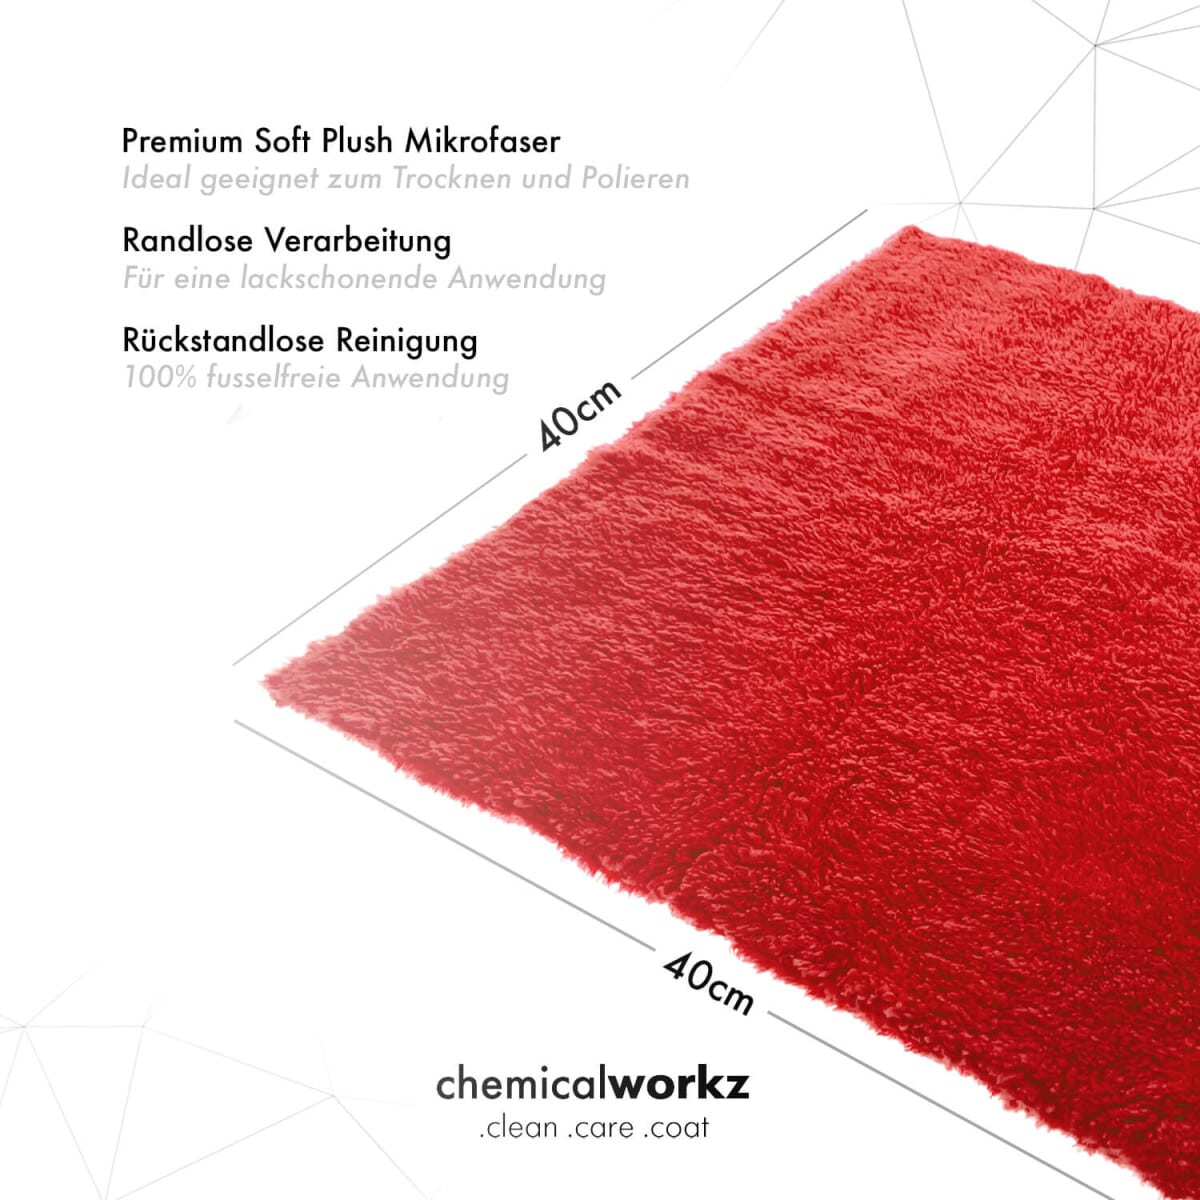 Chemicalworkz Edgeless Soft Touch Towel 500GSM Rot Poliertuch 40×40 Zentimeter